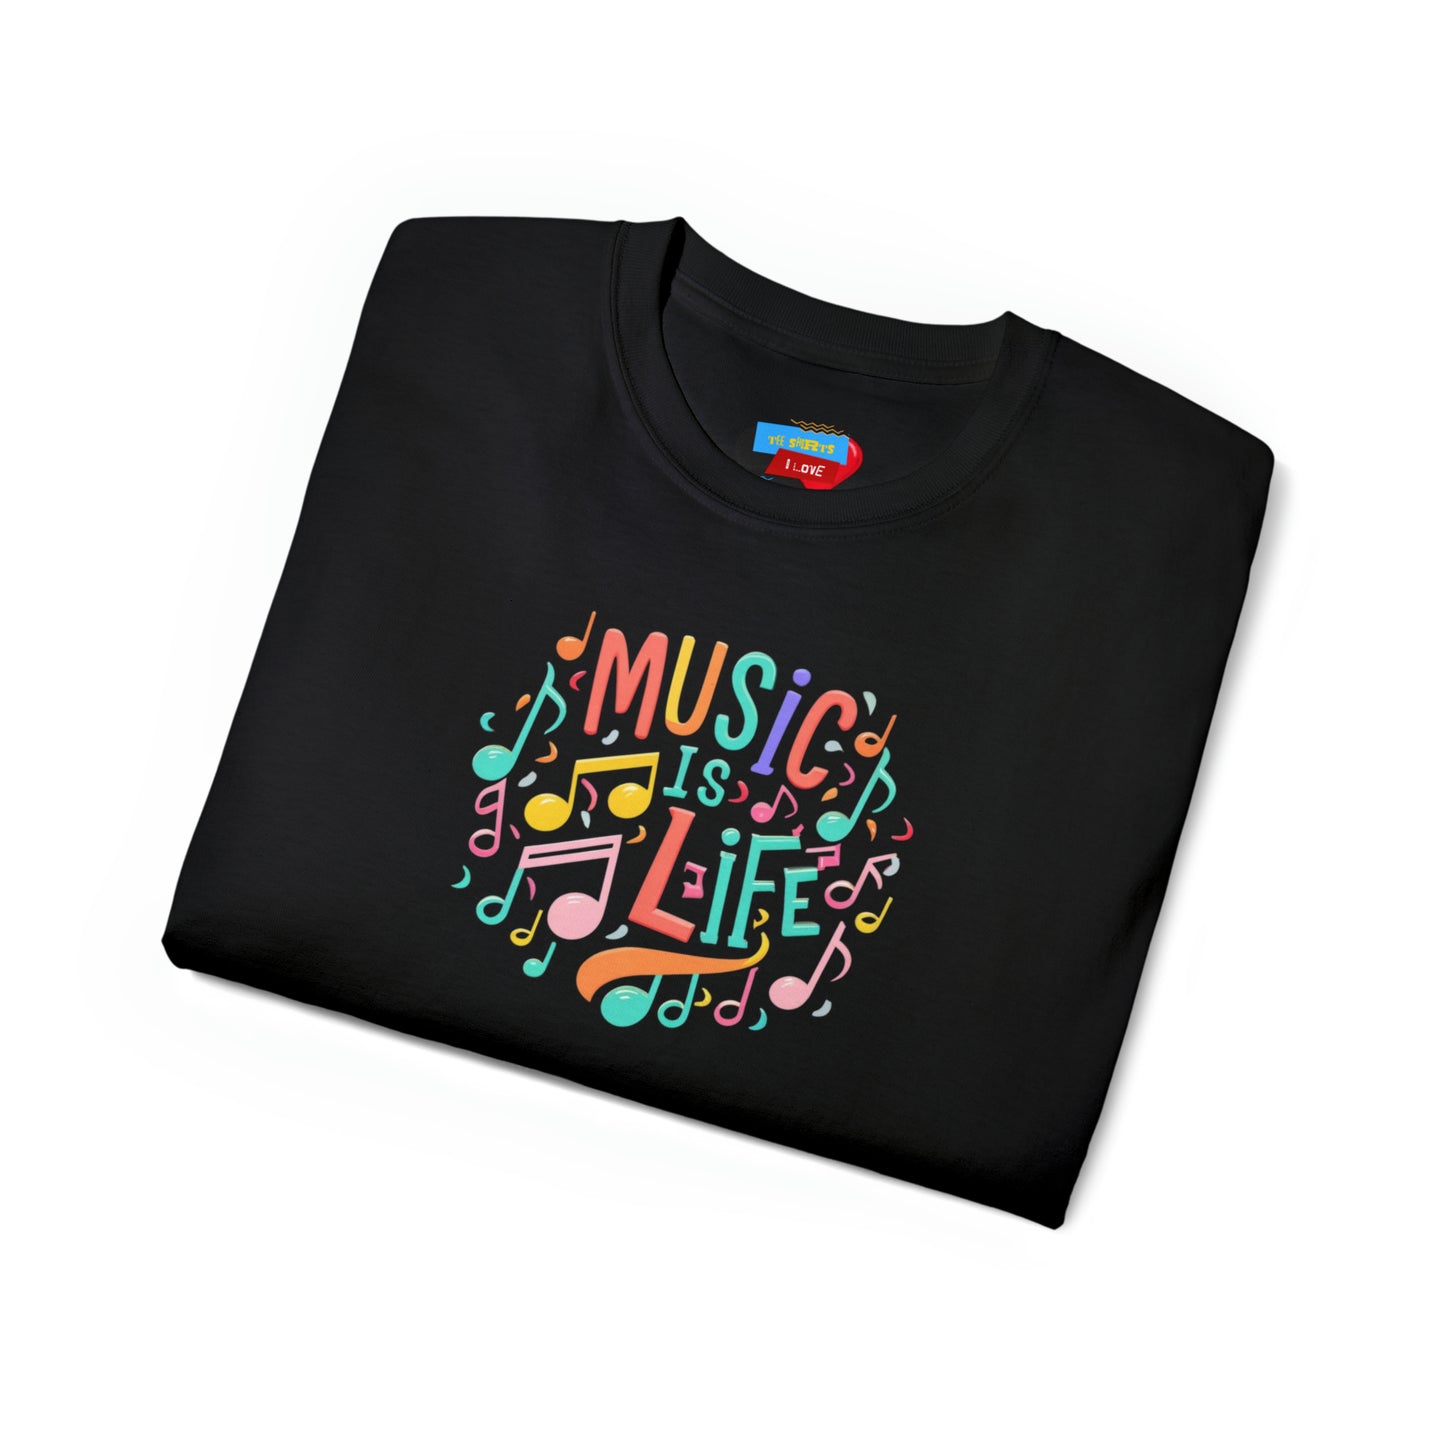 Copy of Music Is Life Unisex Ultra Cotton Tee